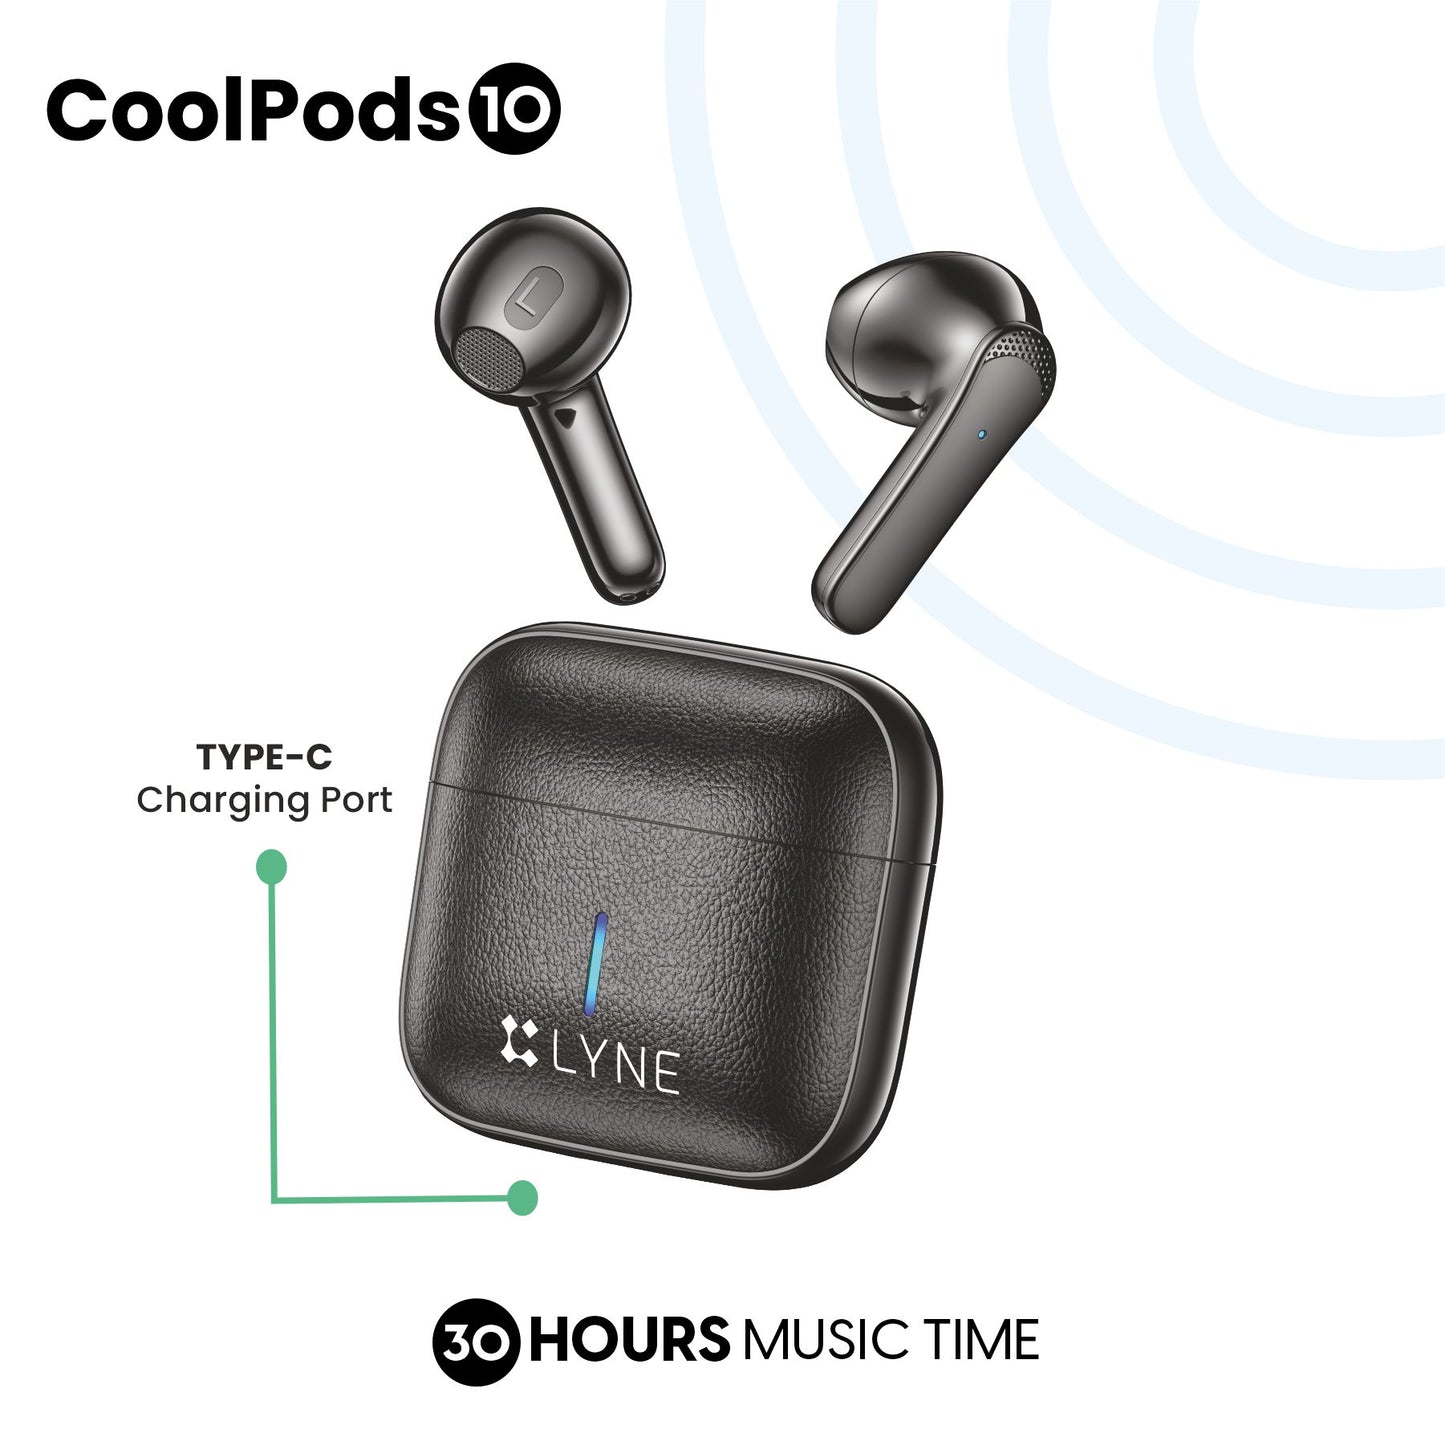 LYNE CoolPods 10 30 Hours Music Time True Wireless Earbuds